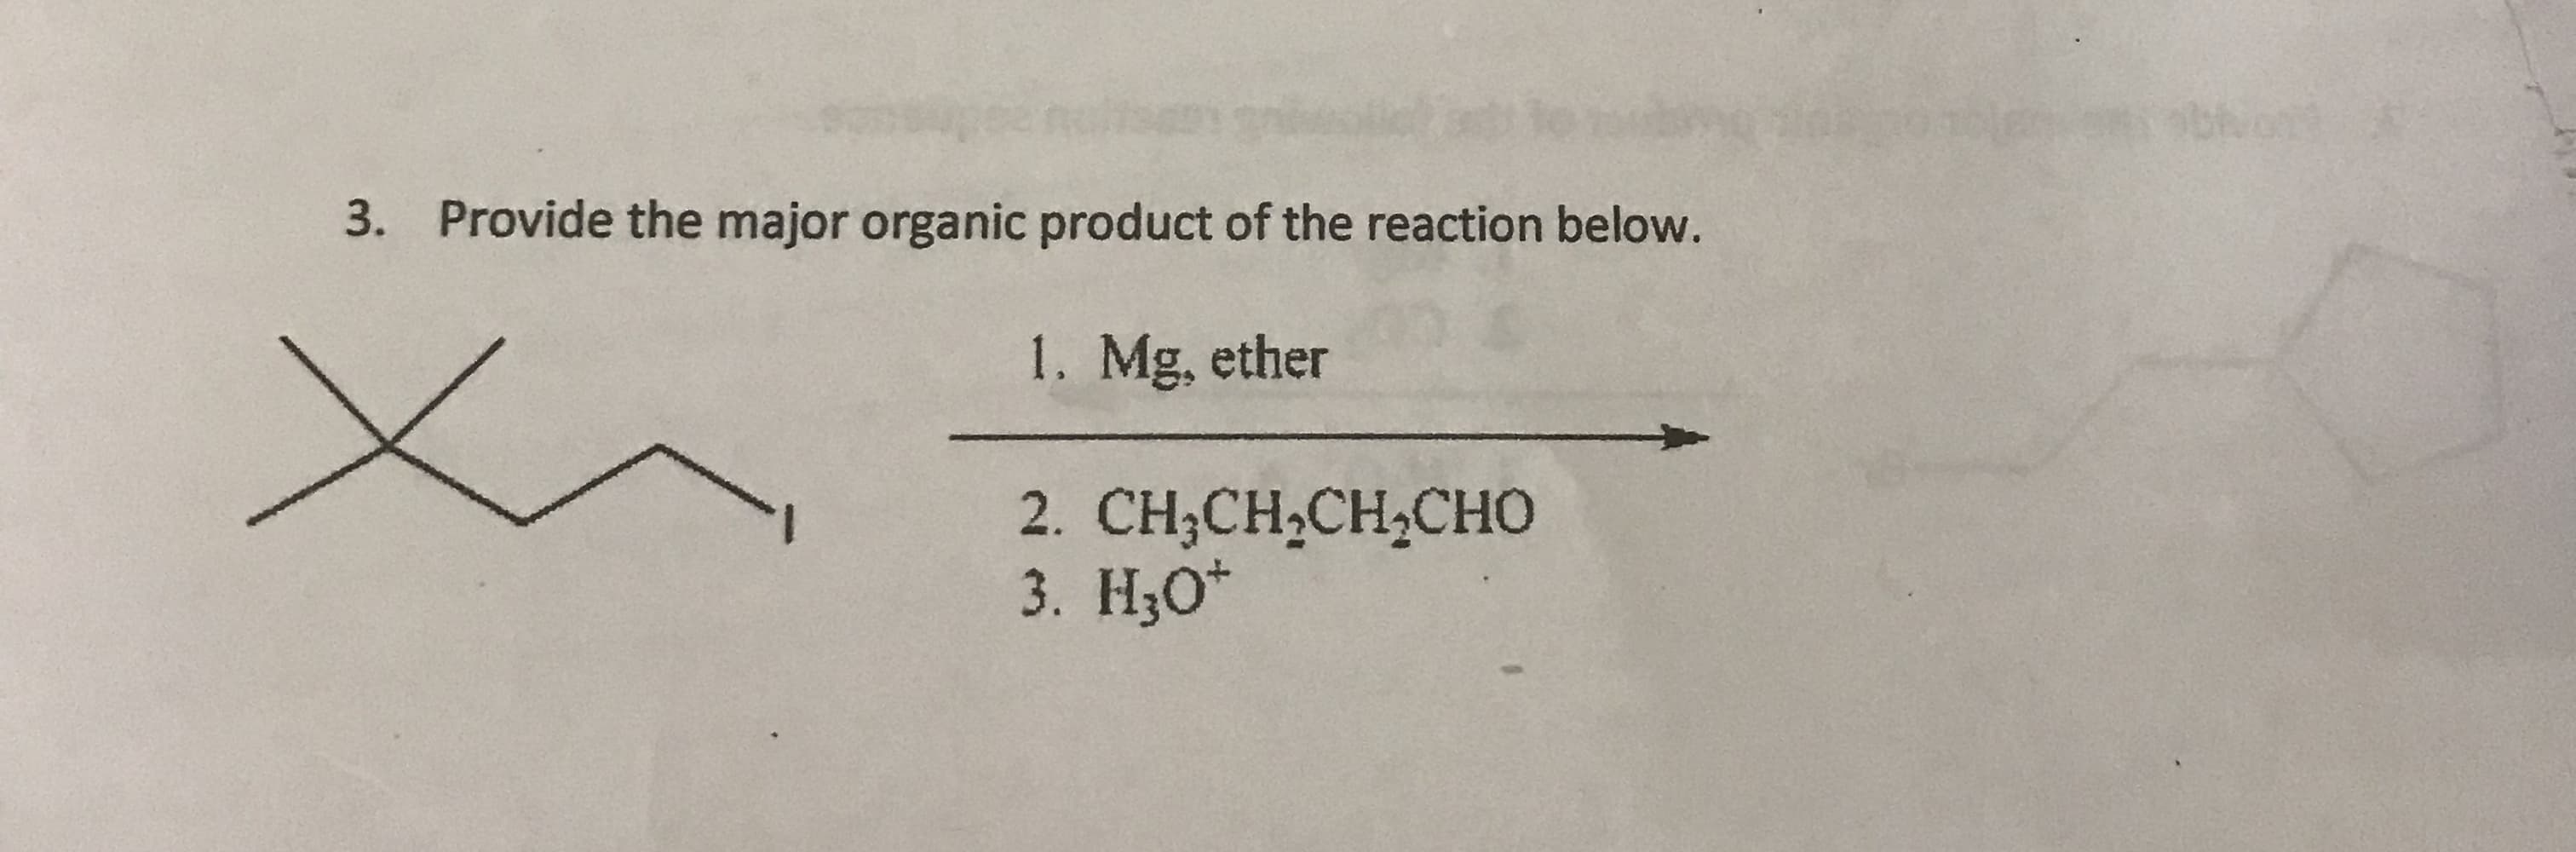 ba
Provide the major organic product of the reaction below.
3.
1. Mg, ether
2. CH,CH,CH,CHо
3. Н,о*
